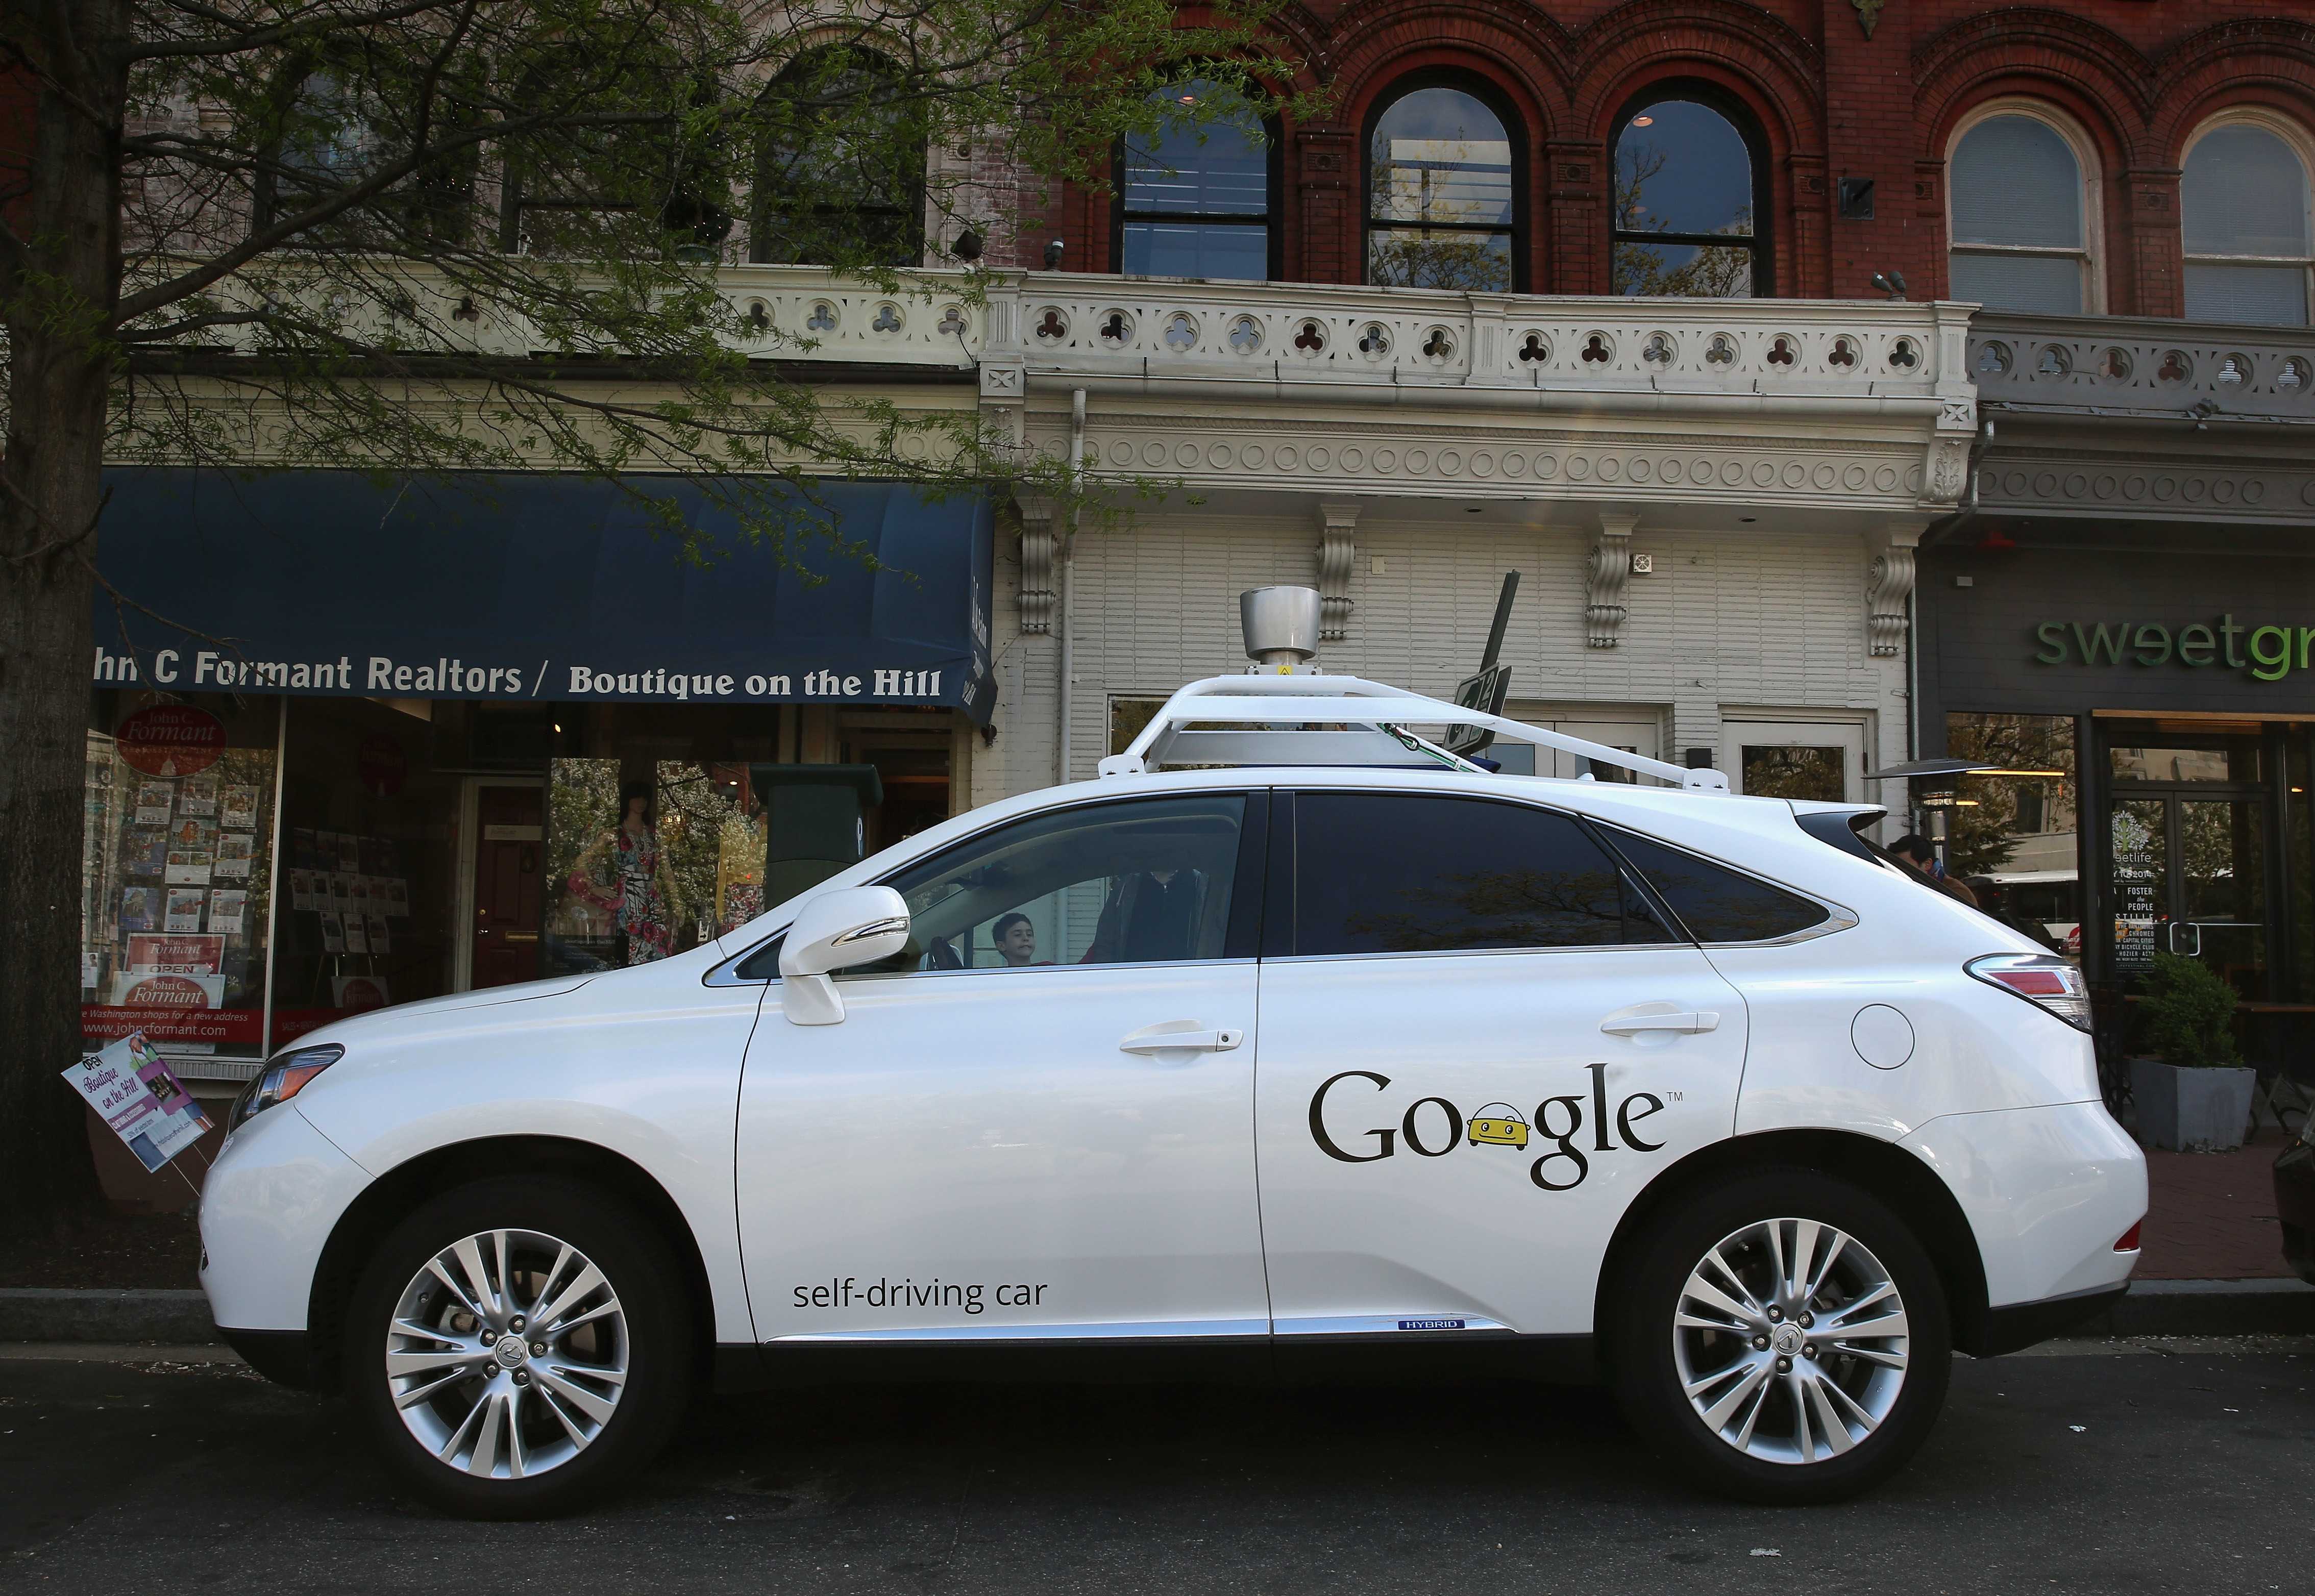 Google's Lexus RX 450H Self Driving Car is seen parked on Pennsylvania Ave. on April 23, 2014 in Washington, D.C. (Mark Wilson—Getty Images)